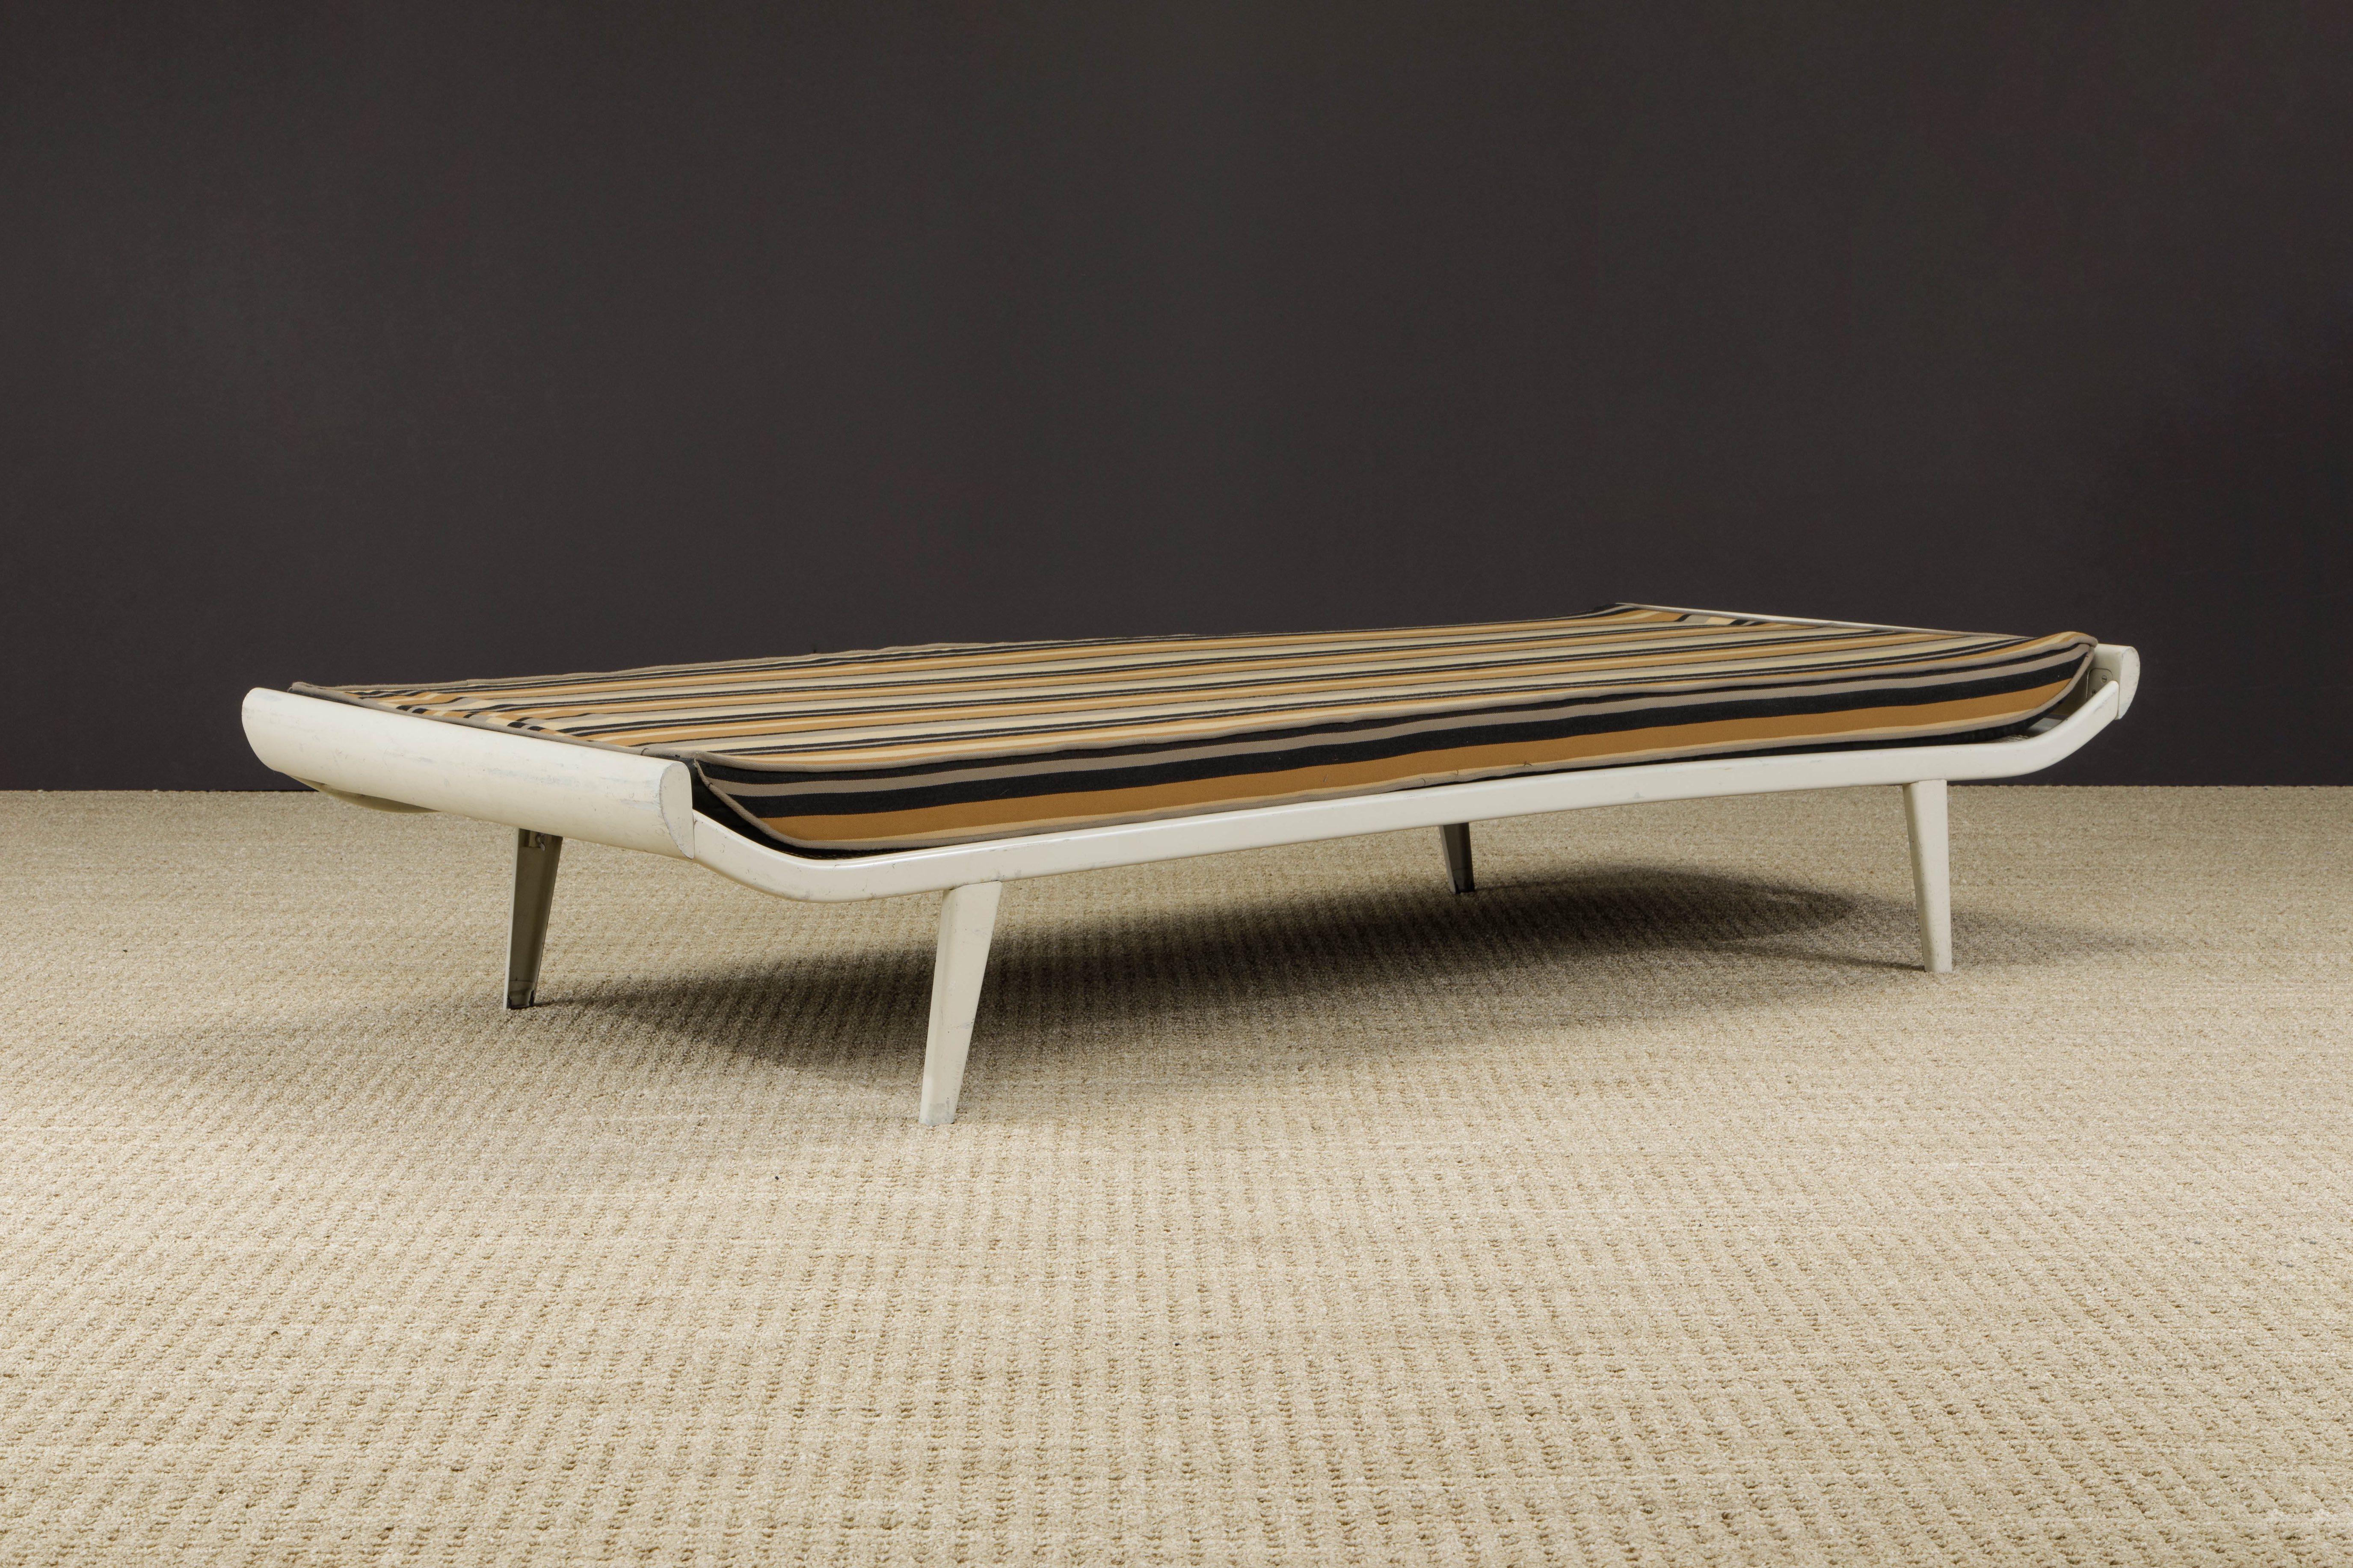 Scandinavian Modern 'Cleopatra' Daybed by A.R. Cordemeijer for Auping Netherlands, c. 1953, Signed For Sale